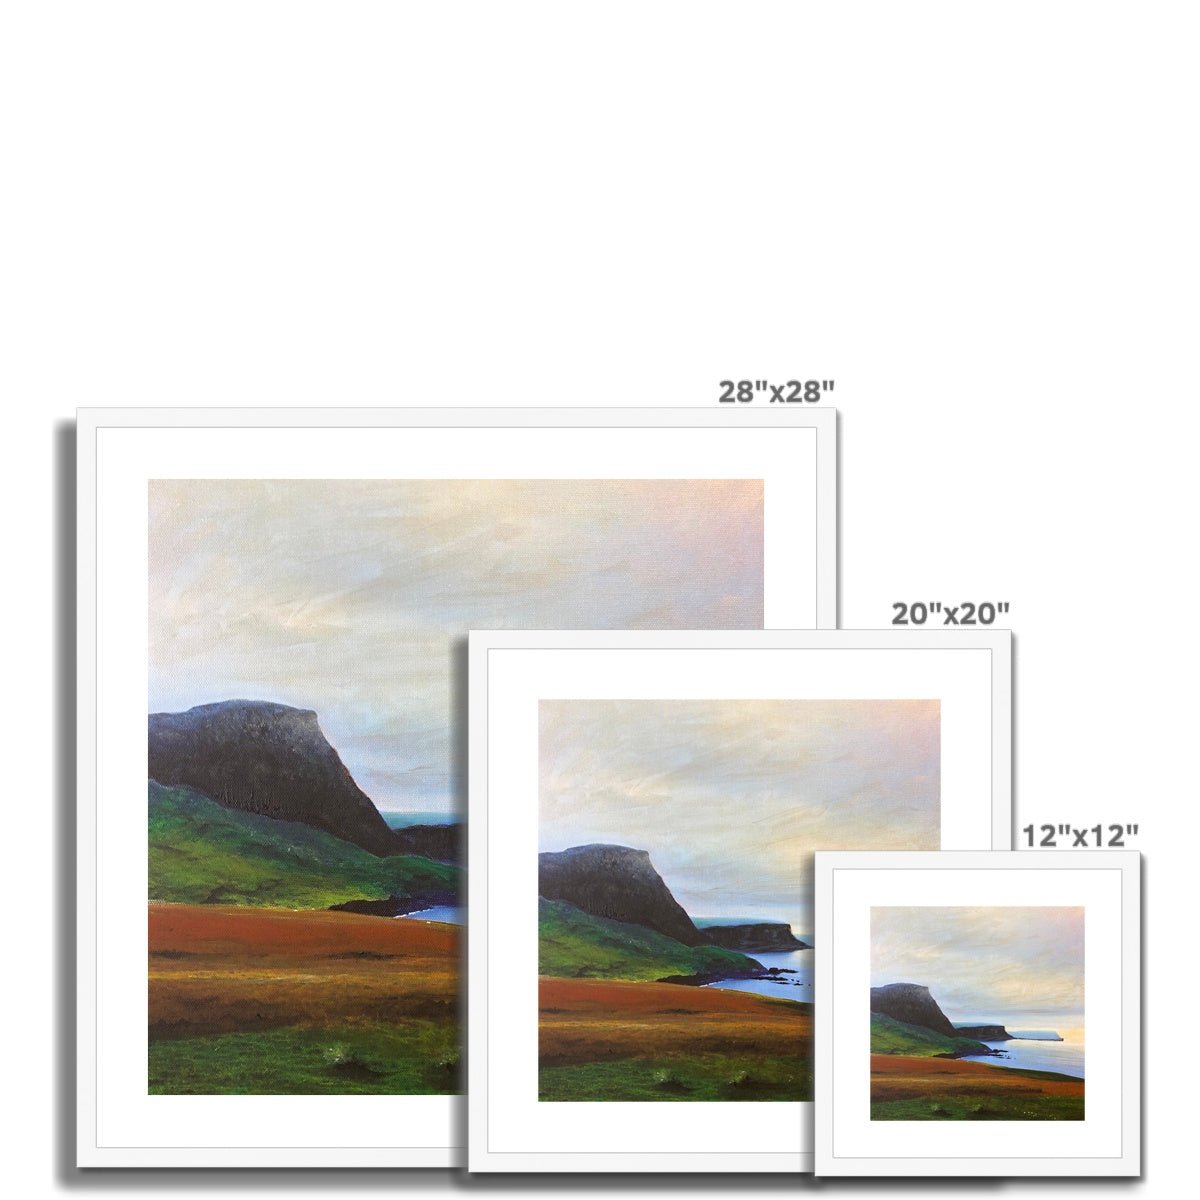 Neist Point Cliffs Skye Painting | Framed & Mounted Prints From Scotland-Framed & Mounted Prints-Skye Art Gallery-Paintings, Prints, Homeware, Art Gifts From Scotland By Scottish Artist Kevin Hunter